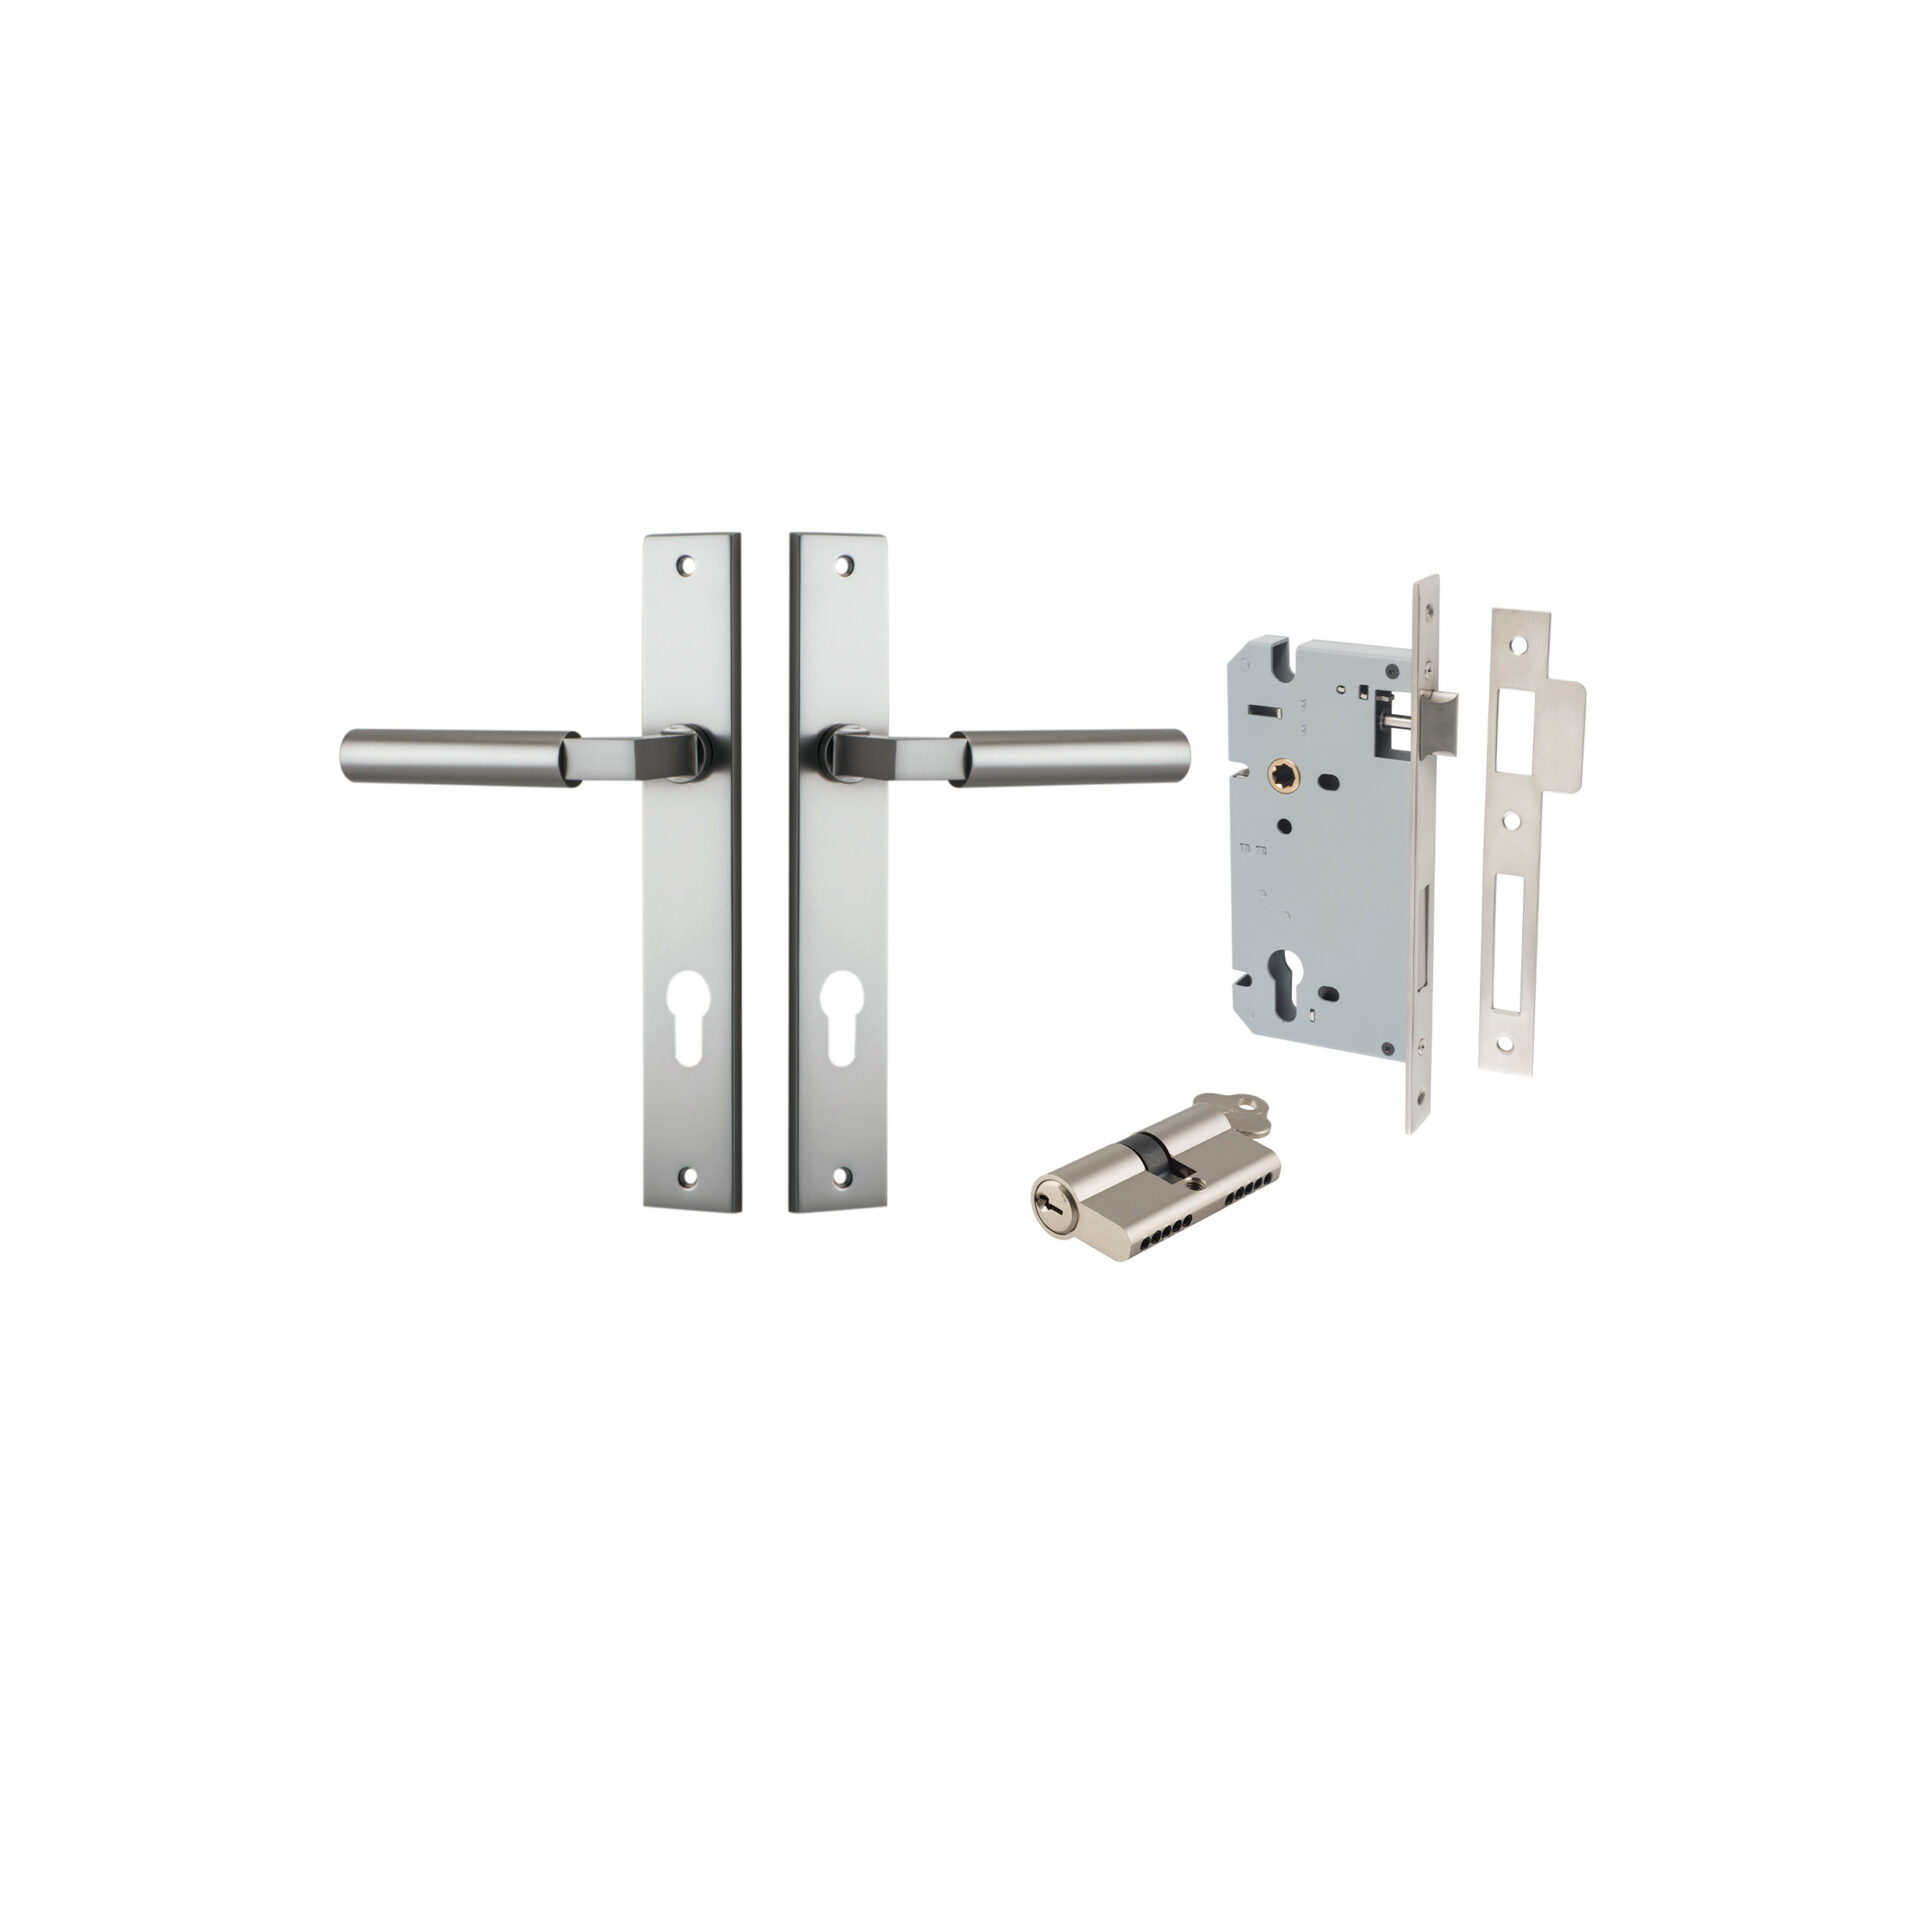 Berlin Lever - Rectangular Backplate Entrance Kit with High Security Lock